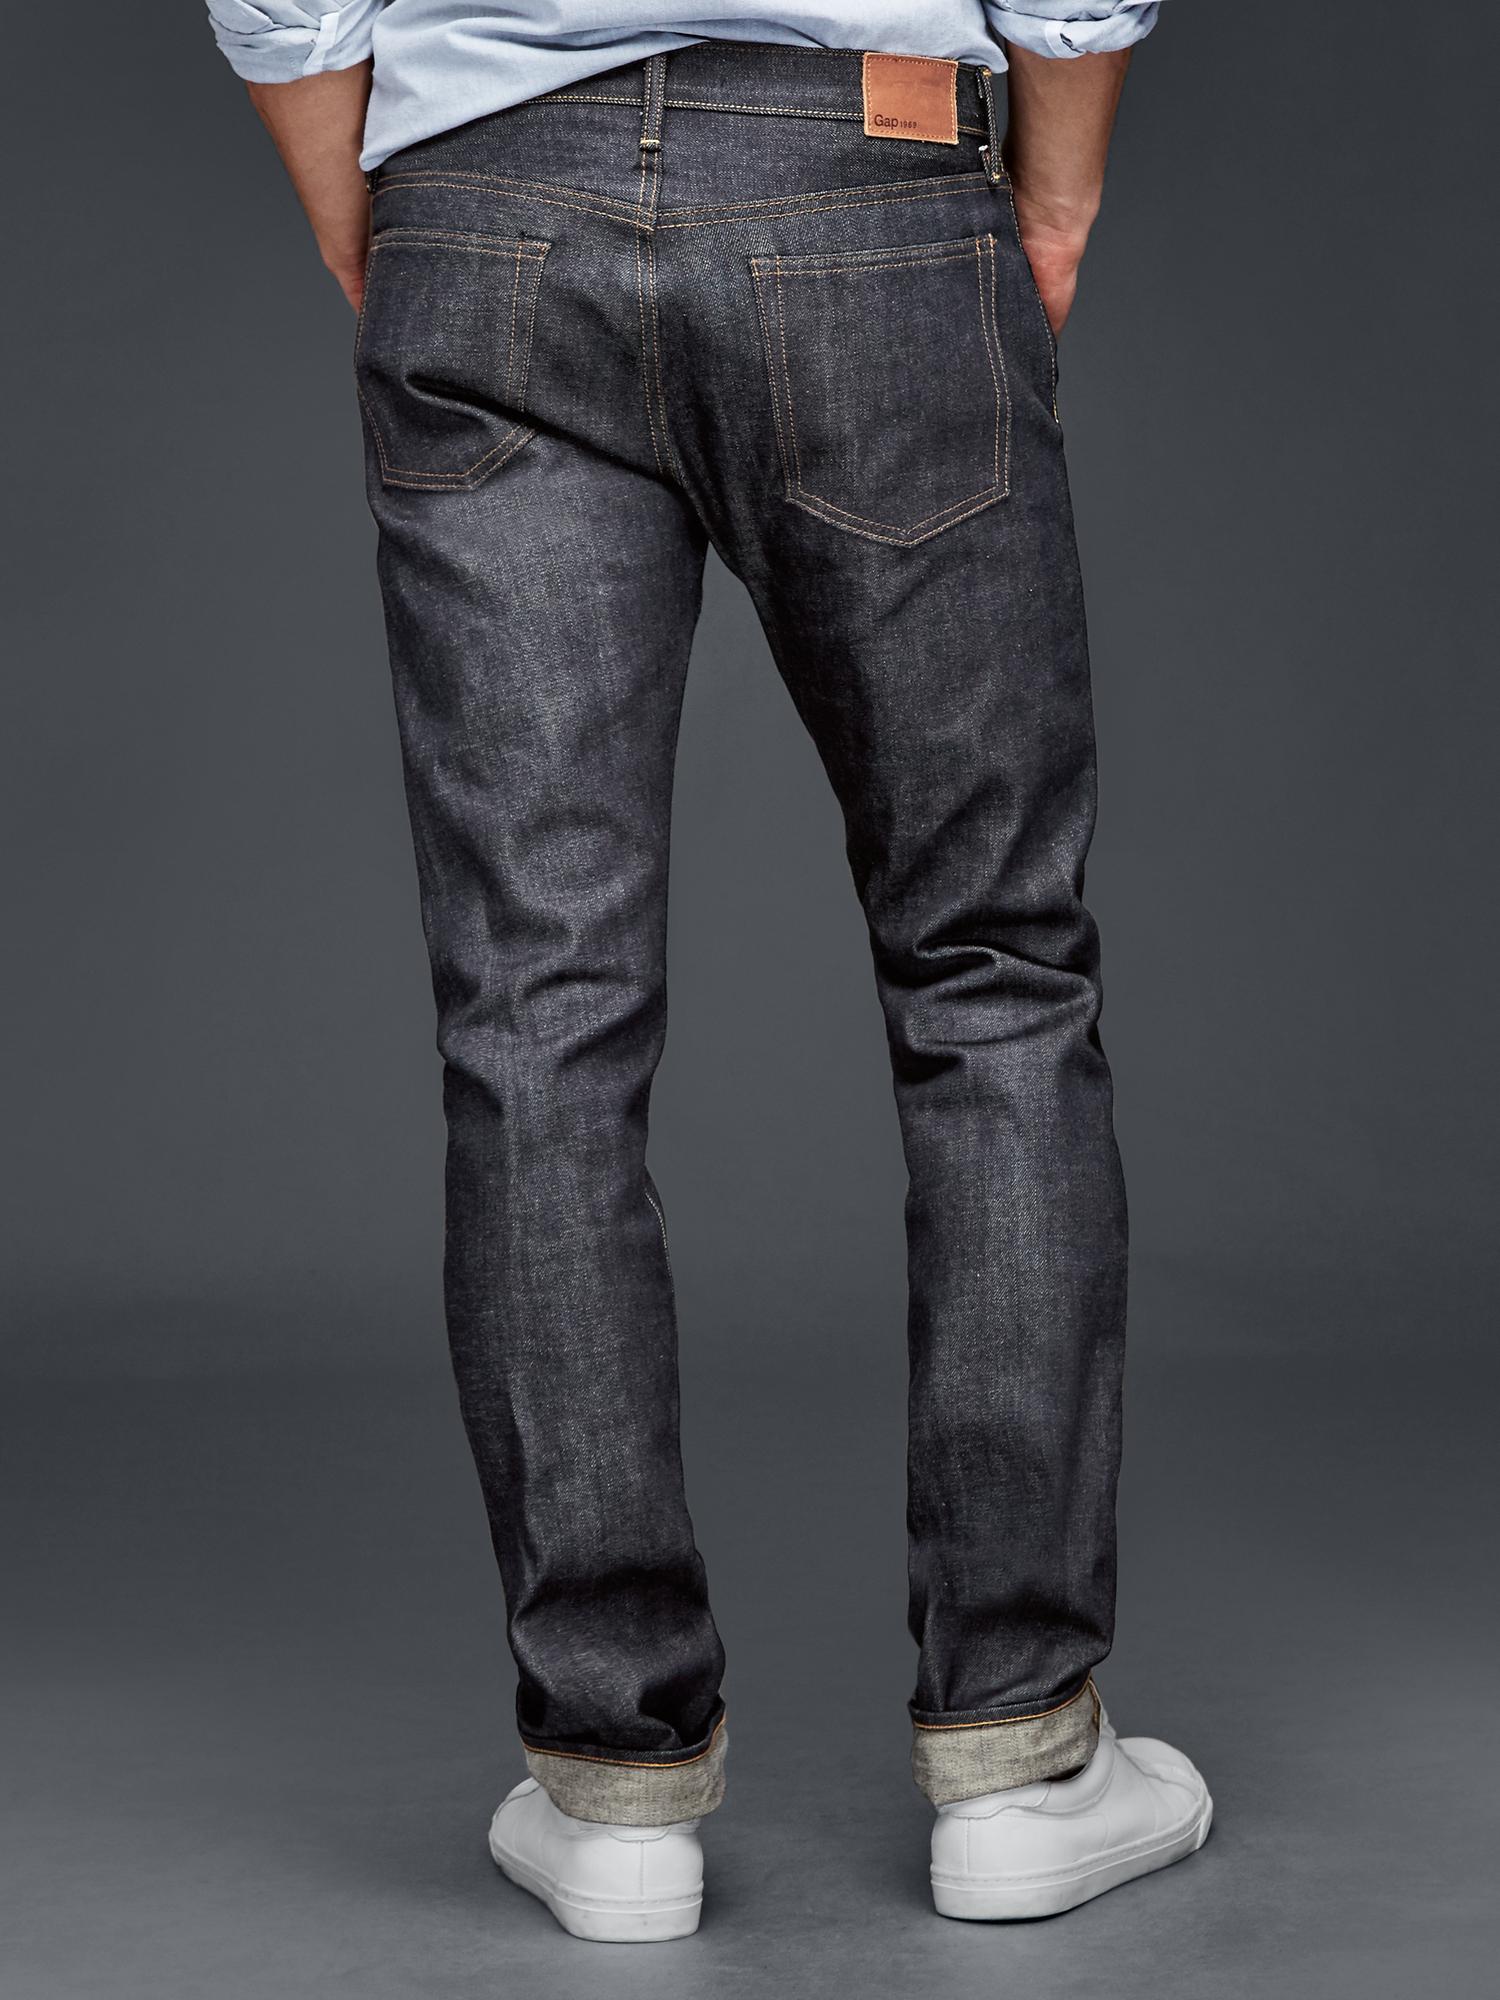 Reviews for Stretch Selvedge Slim-Fit Jeans